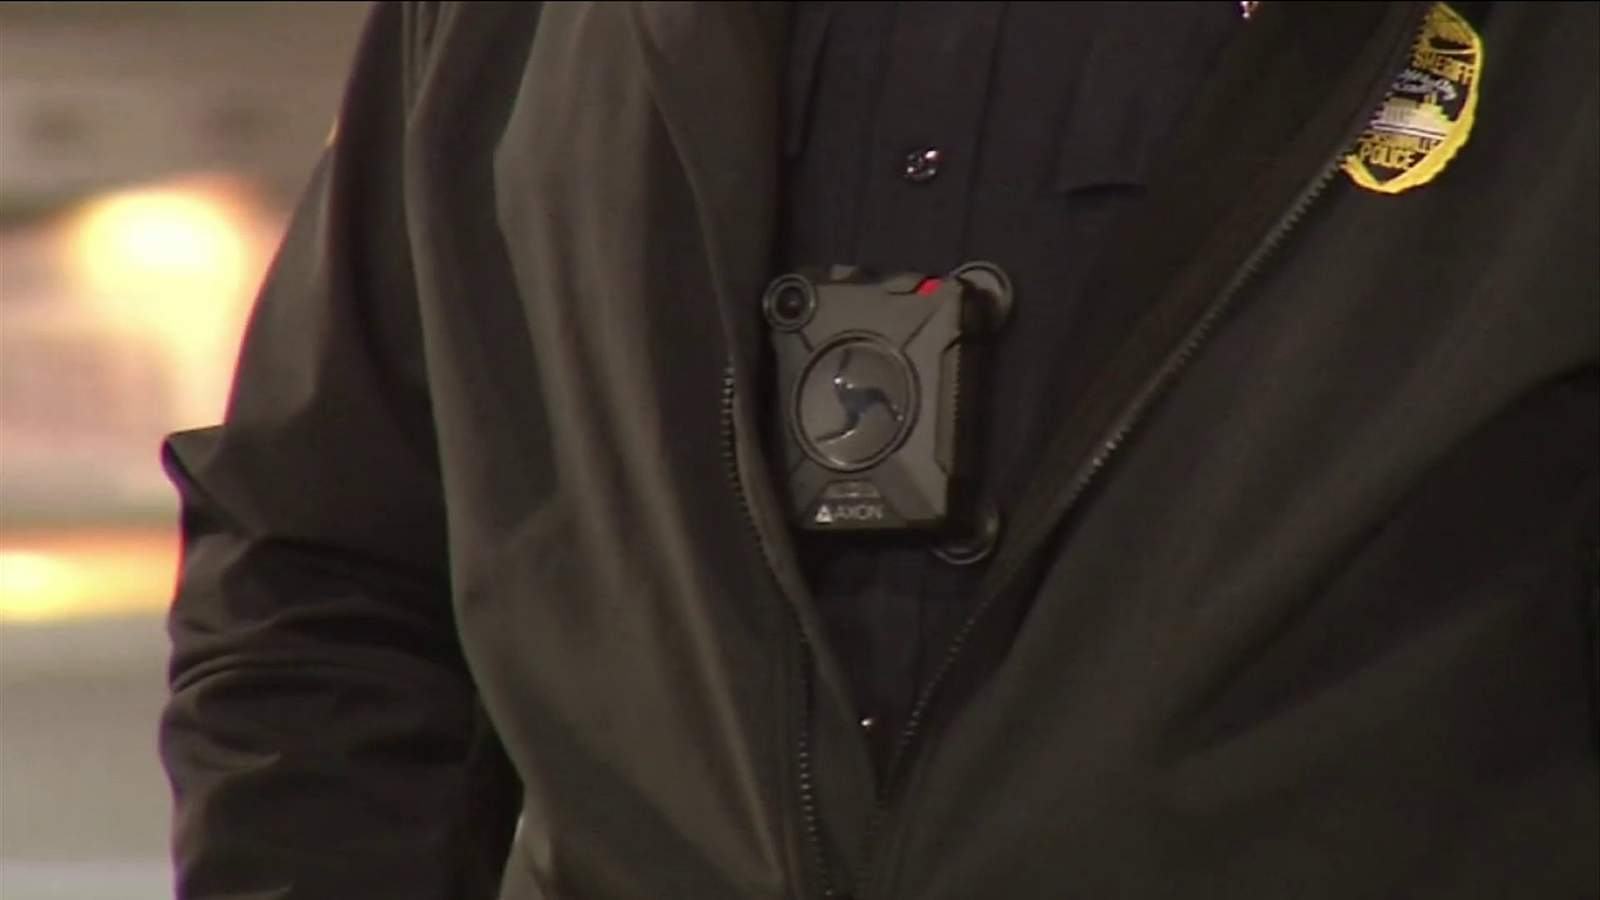 Community groups in Jacksonville praise move to speed up release of police bodycam video